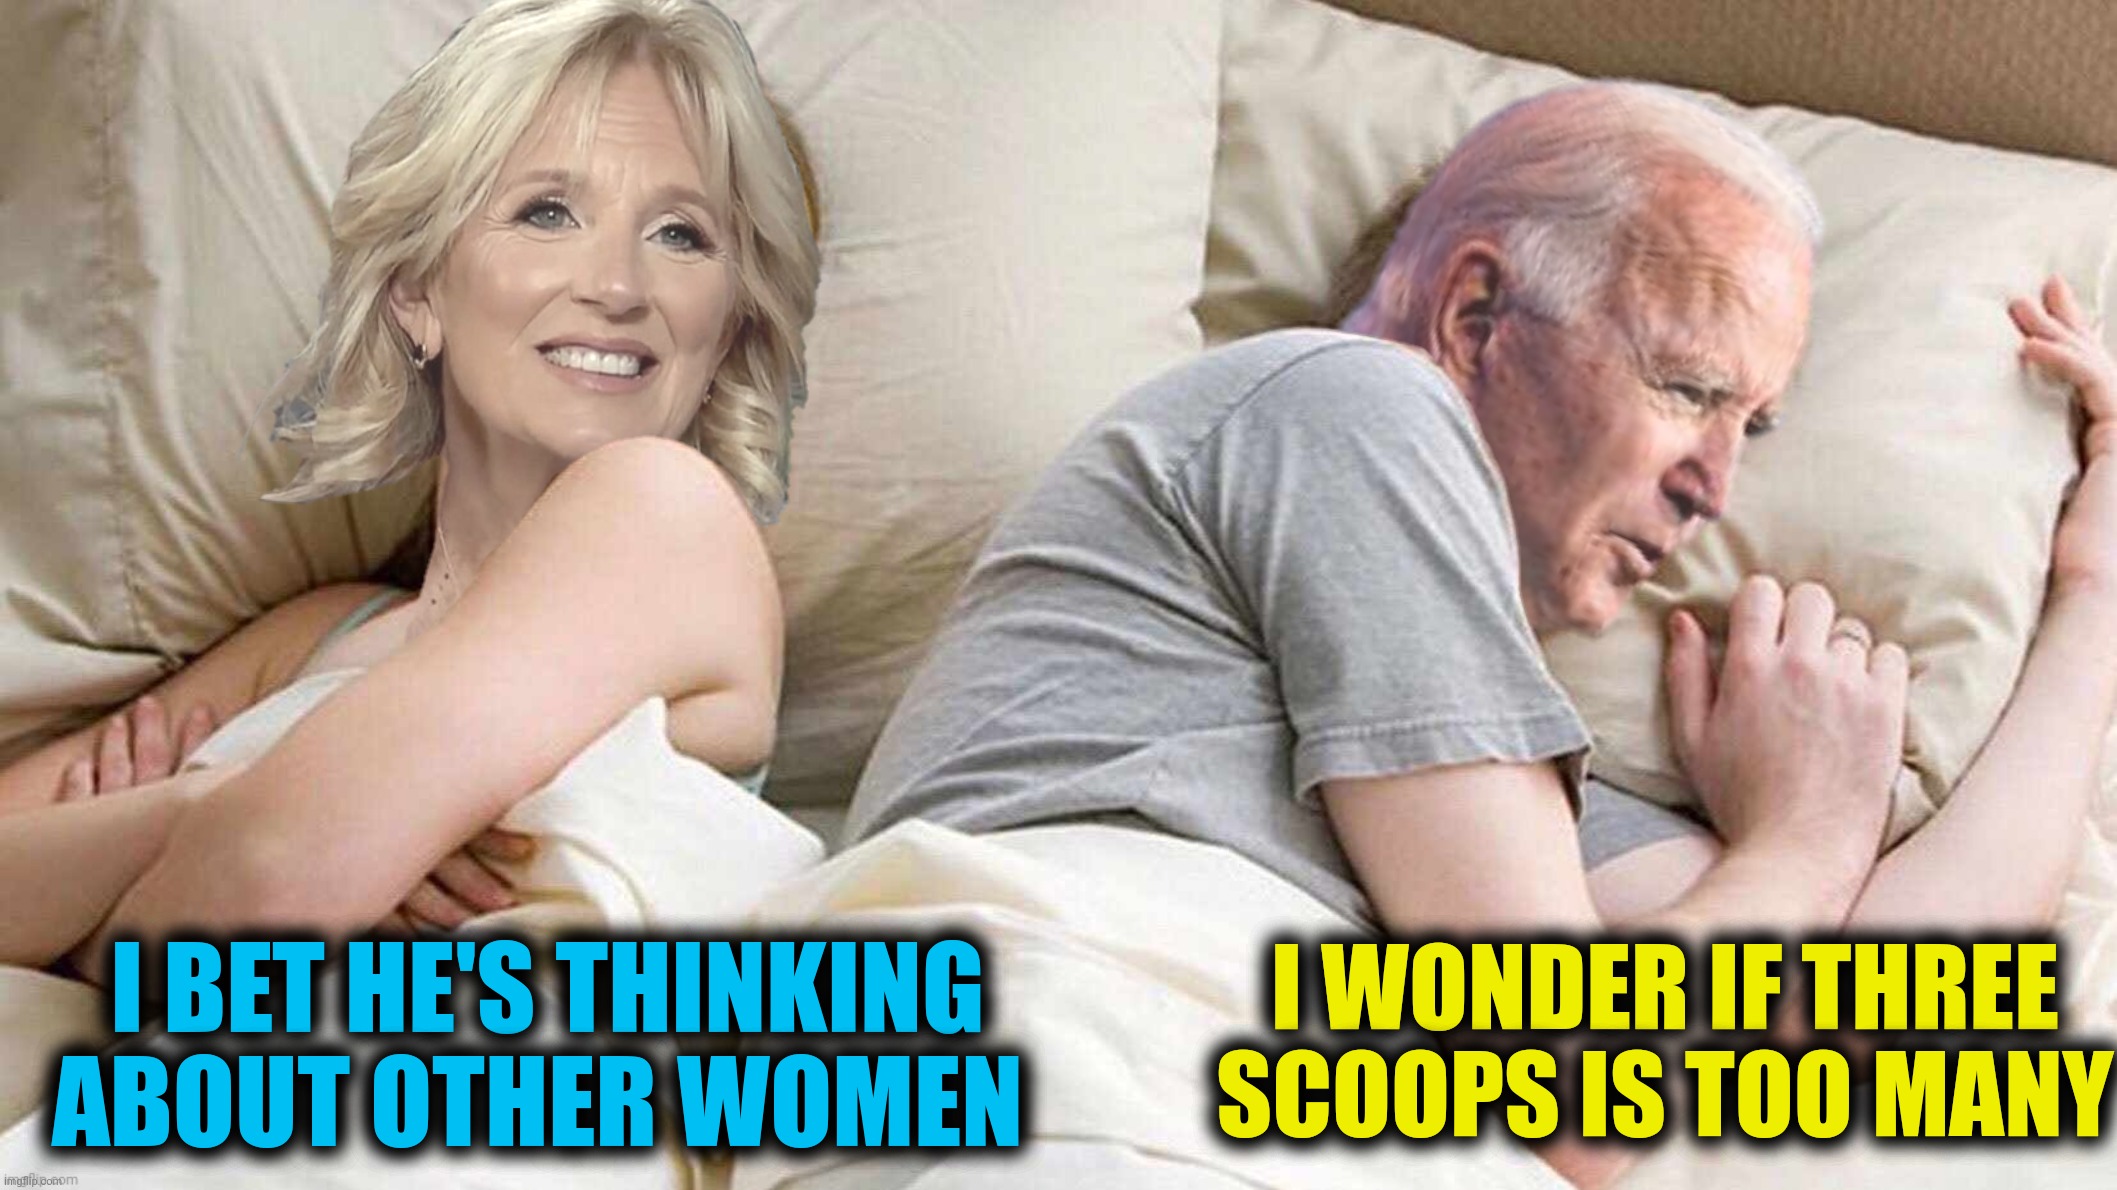 I BET HE'S THINKING ABOUT OTHER WOMEN I WONDER IF THREE SCOOPS IS TOO MANY | made w/ Imgflip meme maker